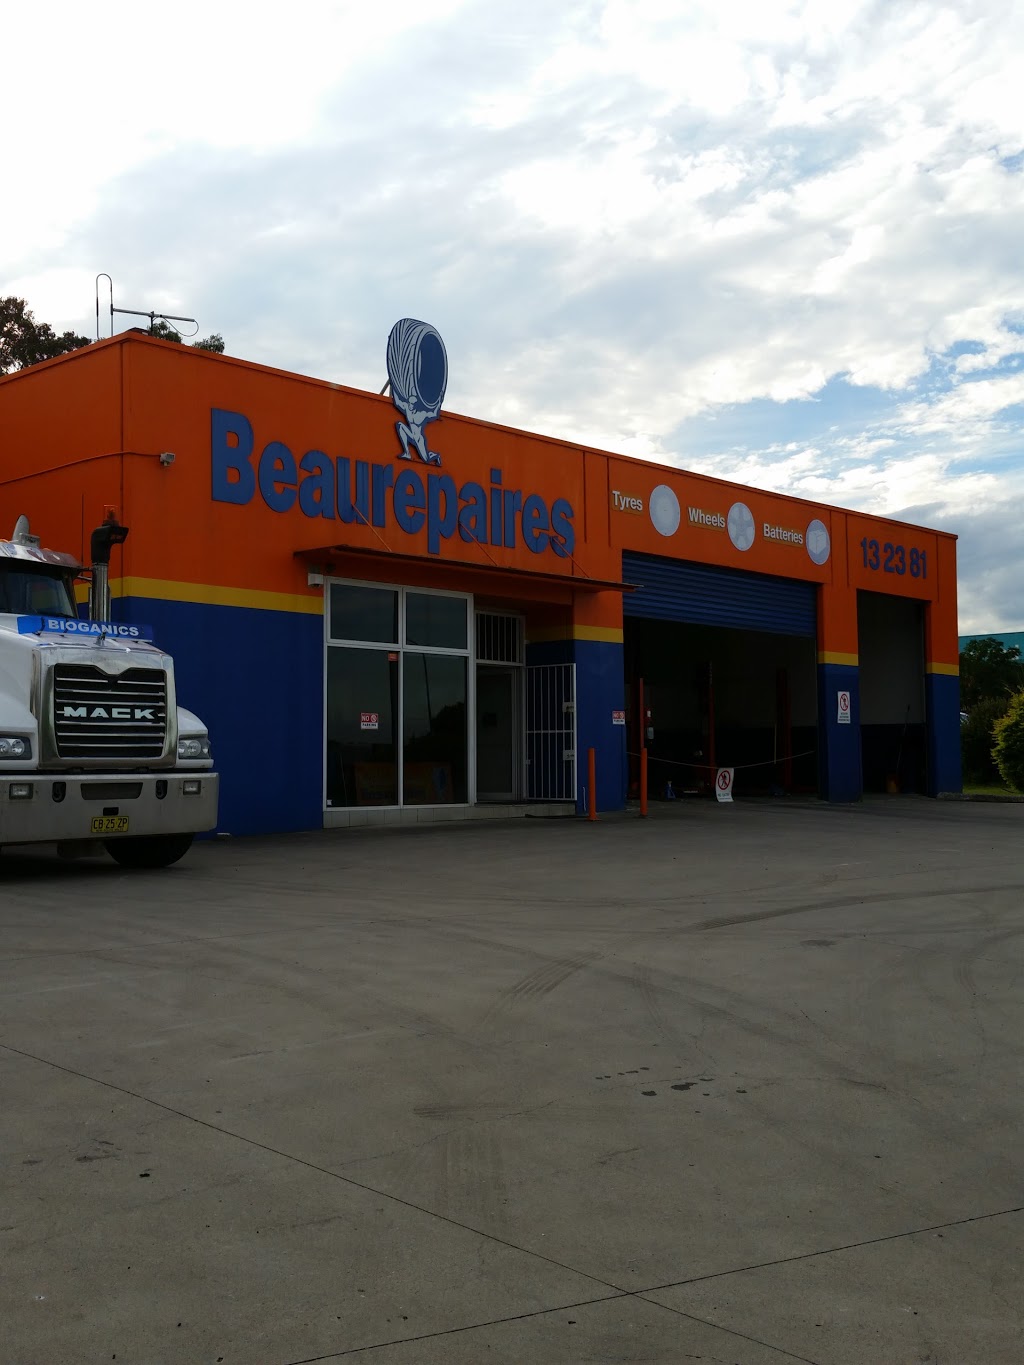 Beaurepaires for Tyres Minto | car repair | 2 Holmes Rd, Minto NSW 2566, Australia | 0291324172 OR +61 2 9132 4172